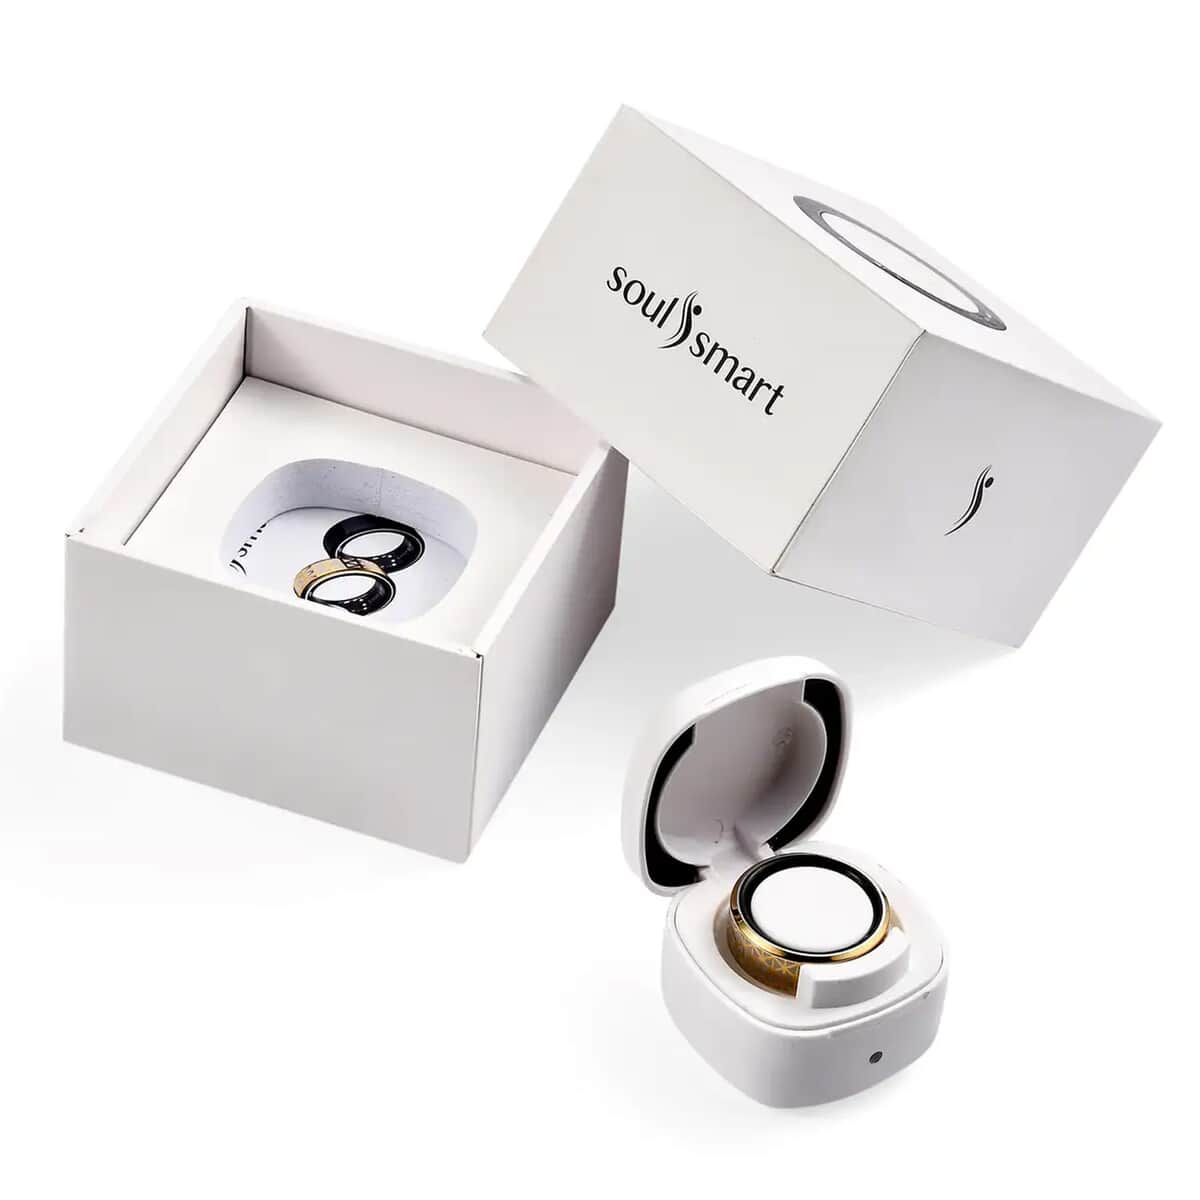 Soulsmart Multifunctional Health Tracker Smart Ring (Size 11.0) in ION Plated YG Stainless Steel (Compatible with Android 5.0+ & Apple IOS 10.0+ Systems) image number 10